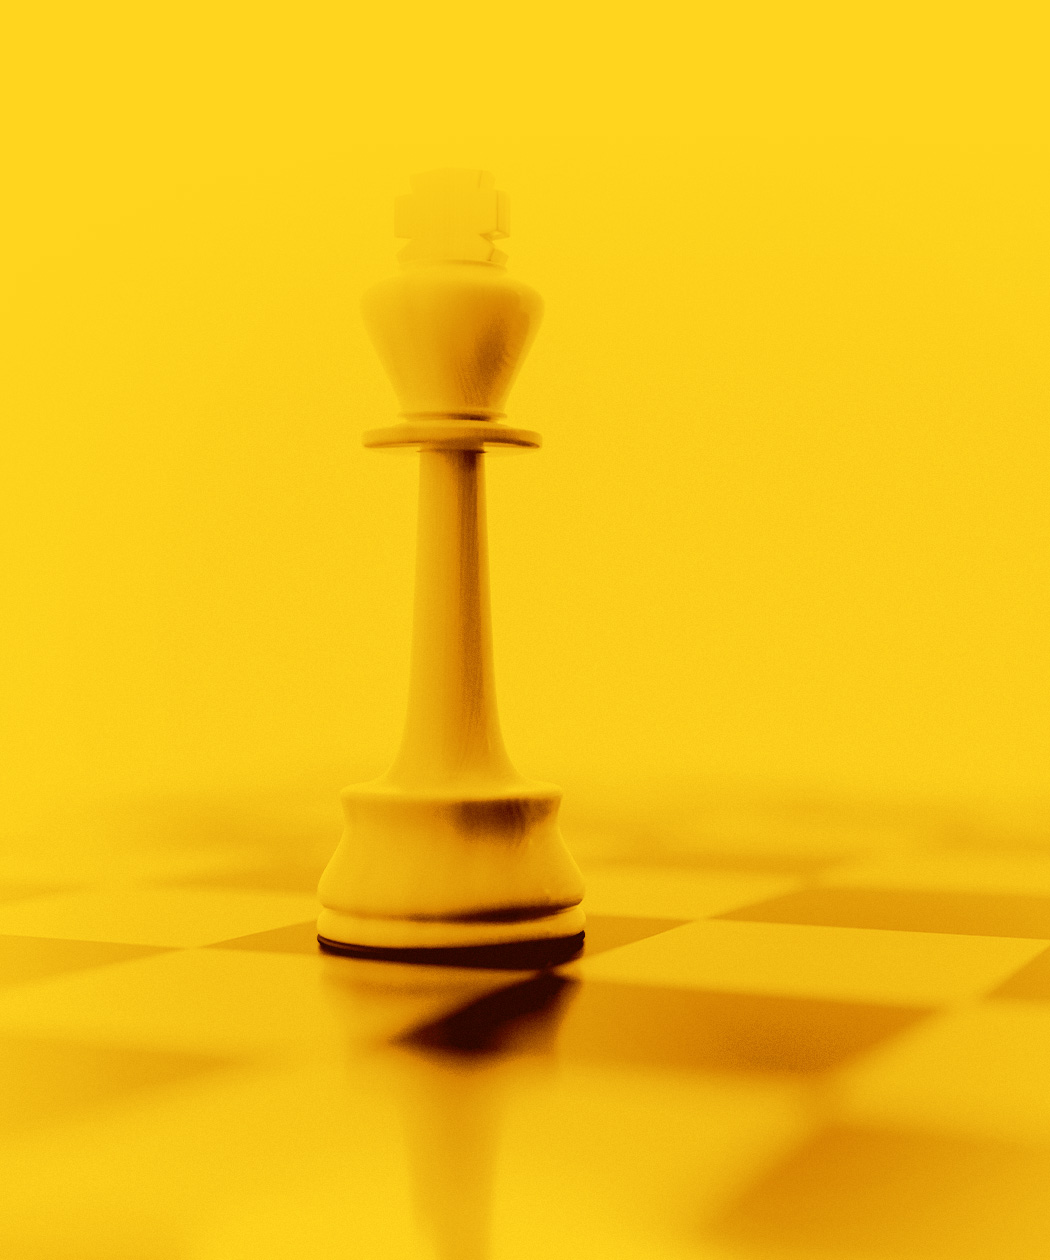 Chess piece on chess board in yellow filter